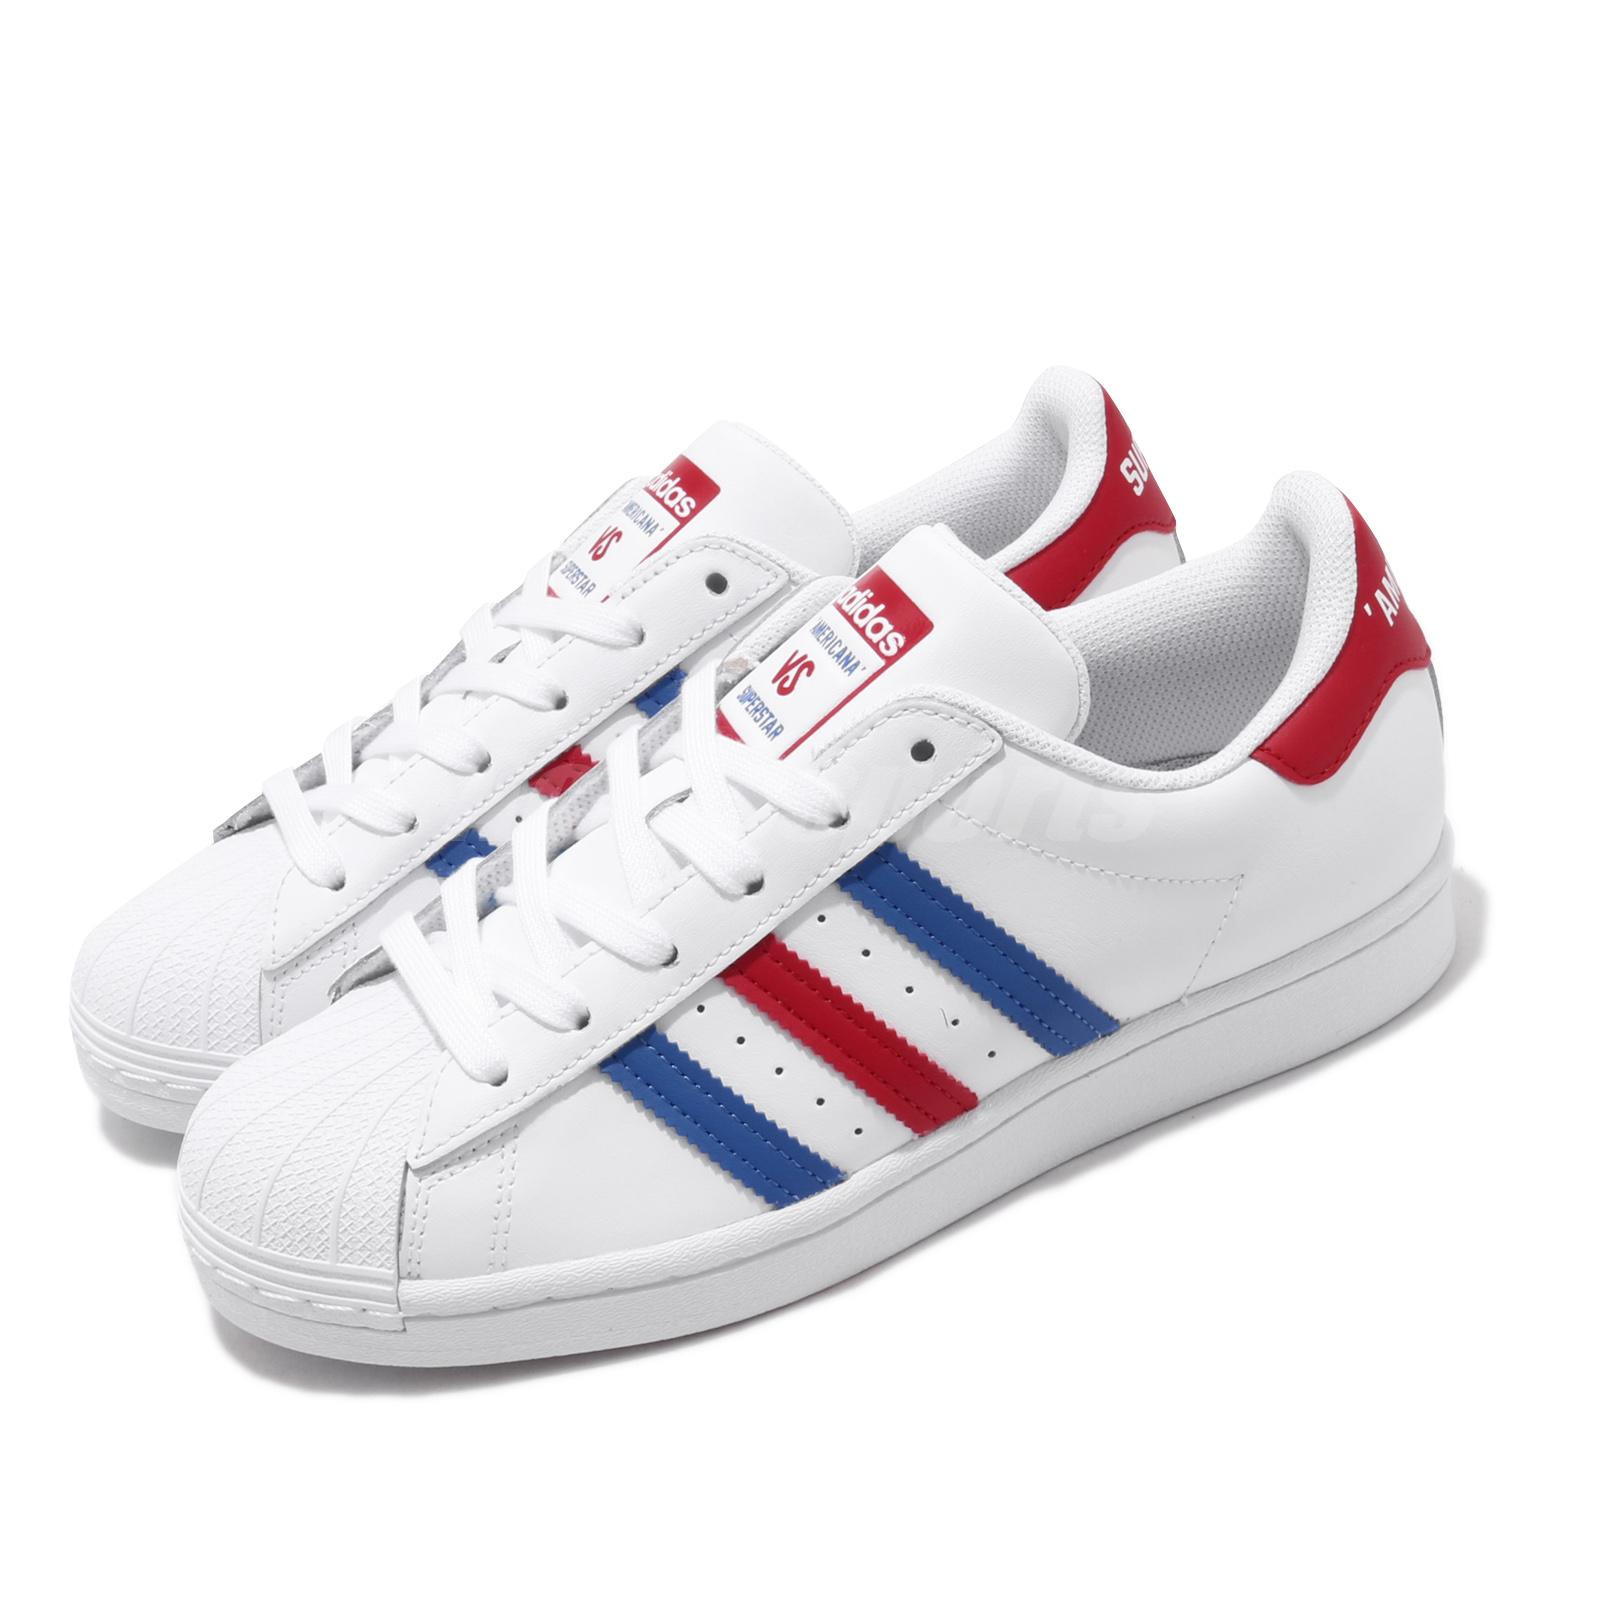 Now Available: adidas Superstar "Americana" — Sneaker Shouts